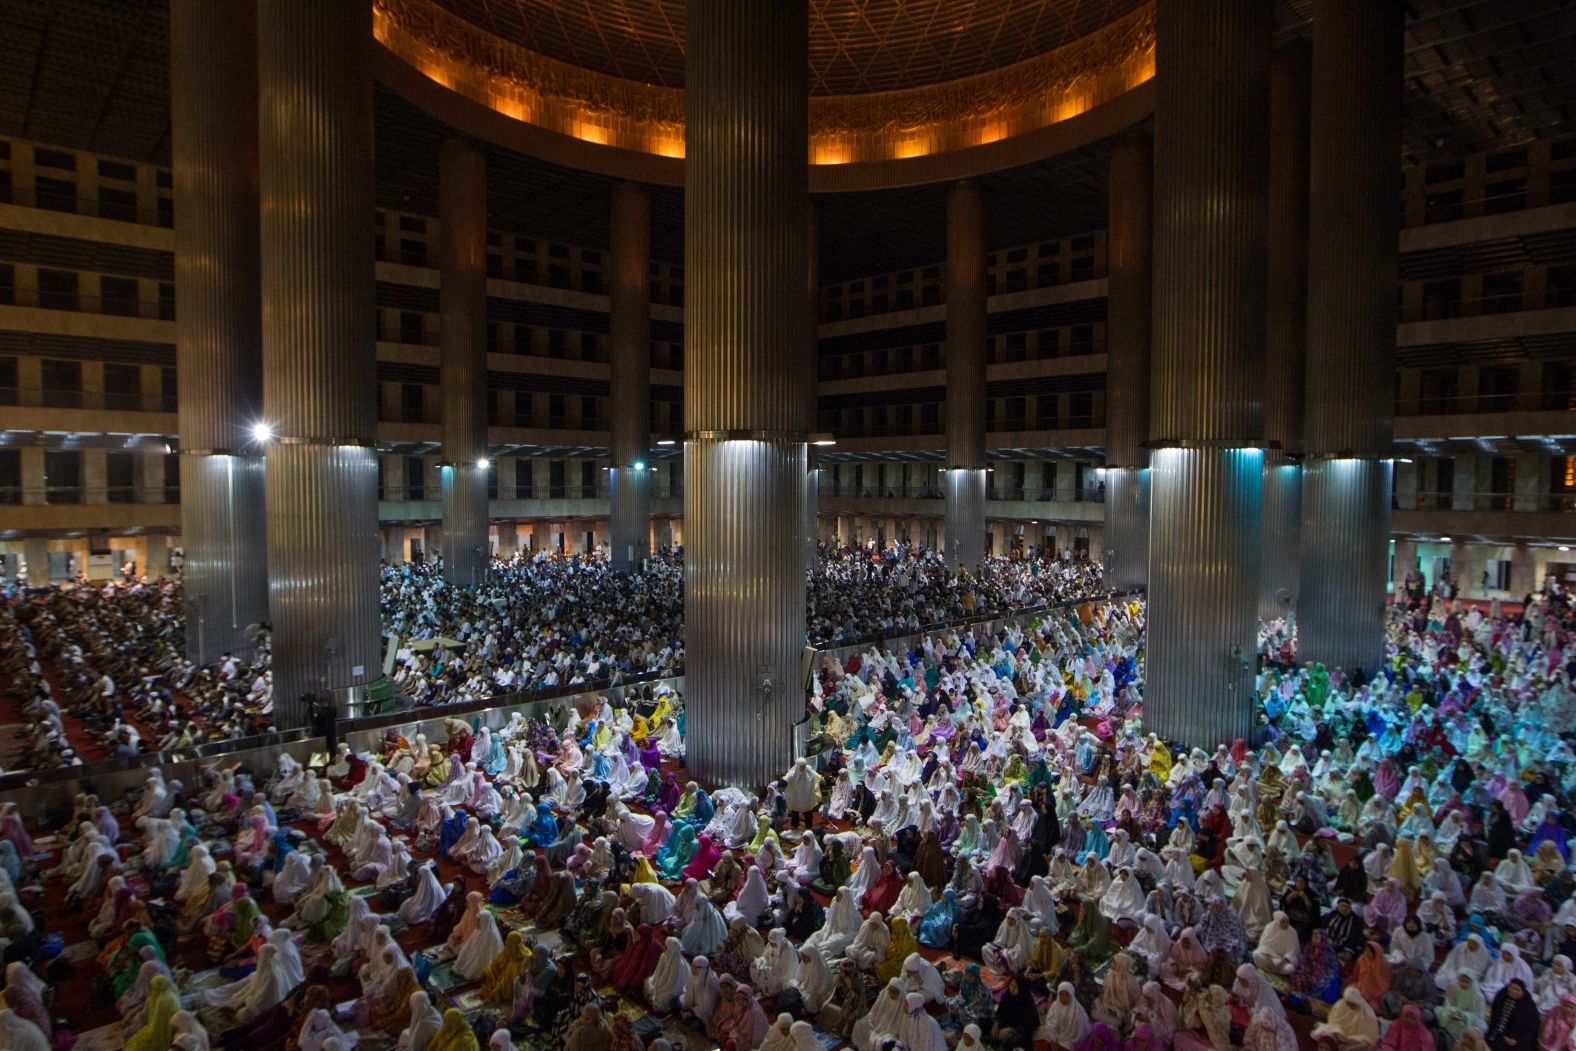 Indonesian Muslims perform an evening prayer called Tarawih the night before the start of the holy fasting month of Ramadan, at Istiqlal mosque in Jakarta, Indonesia, on May 5.